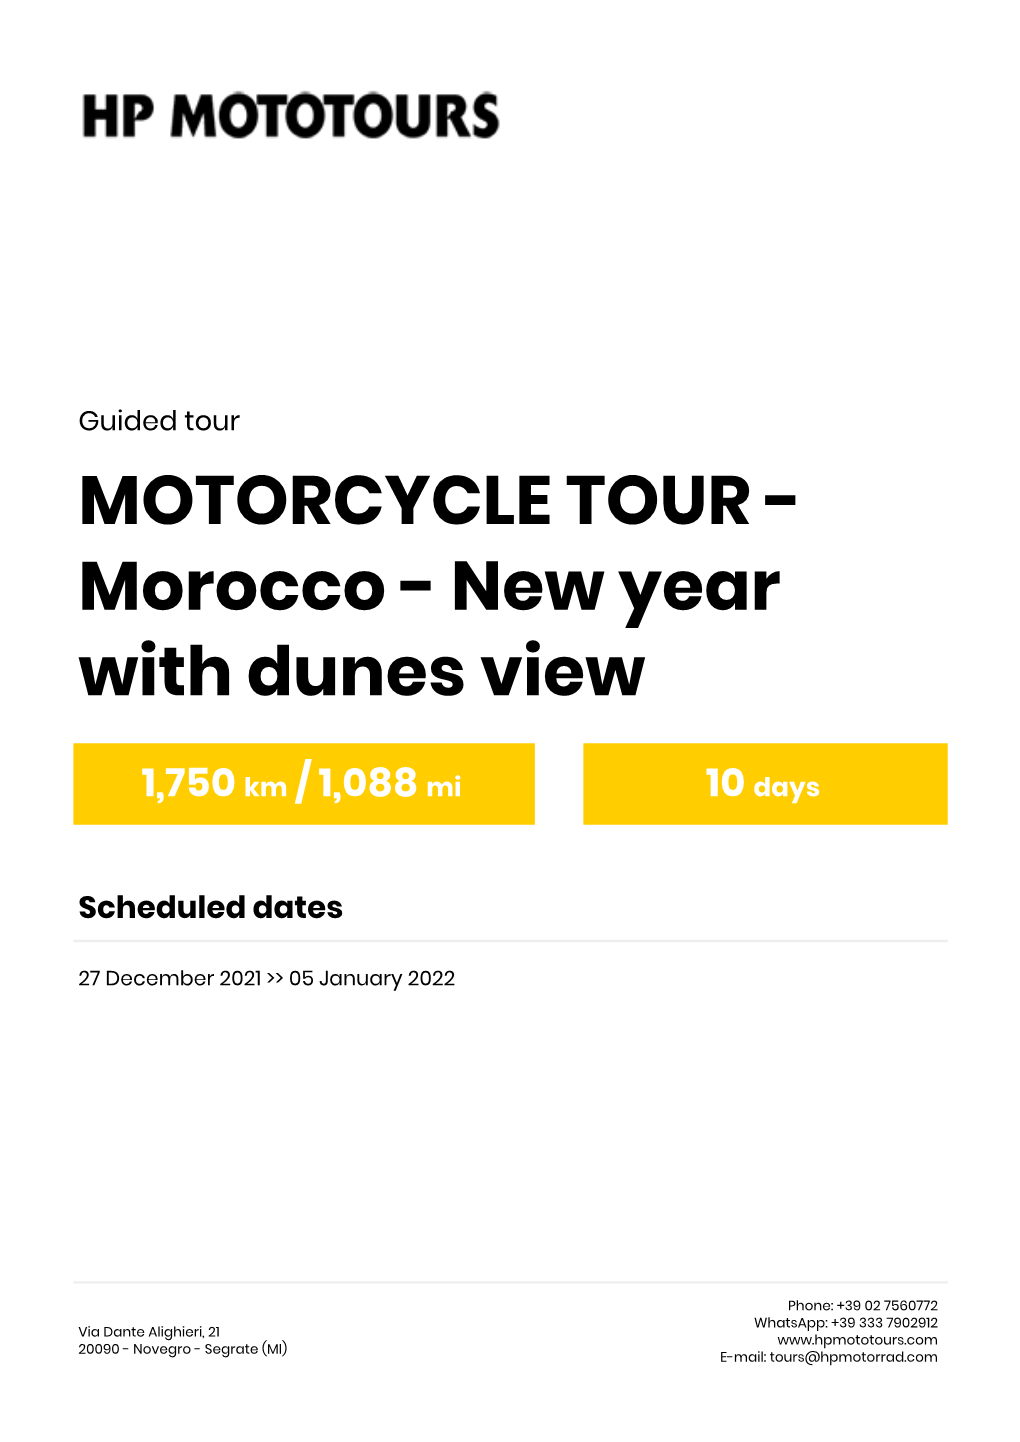 MOTORCYCLE TOUR - Morocco - New Year with Dunes View